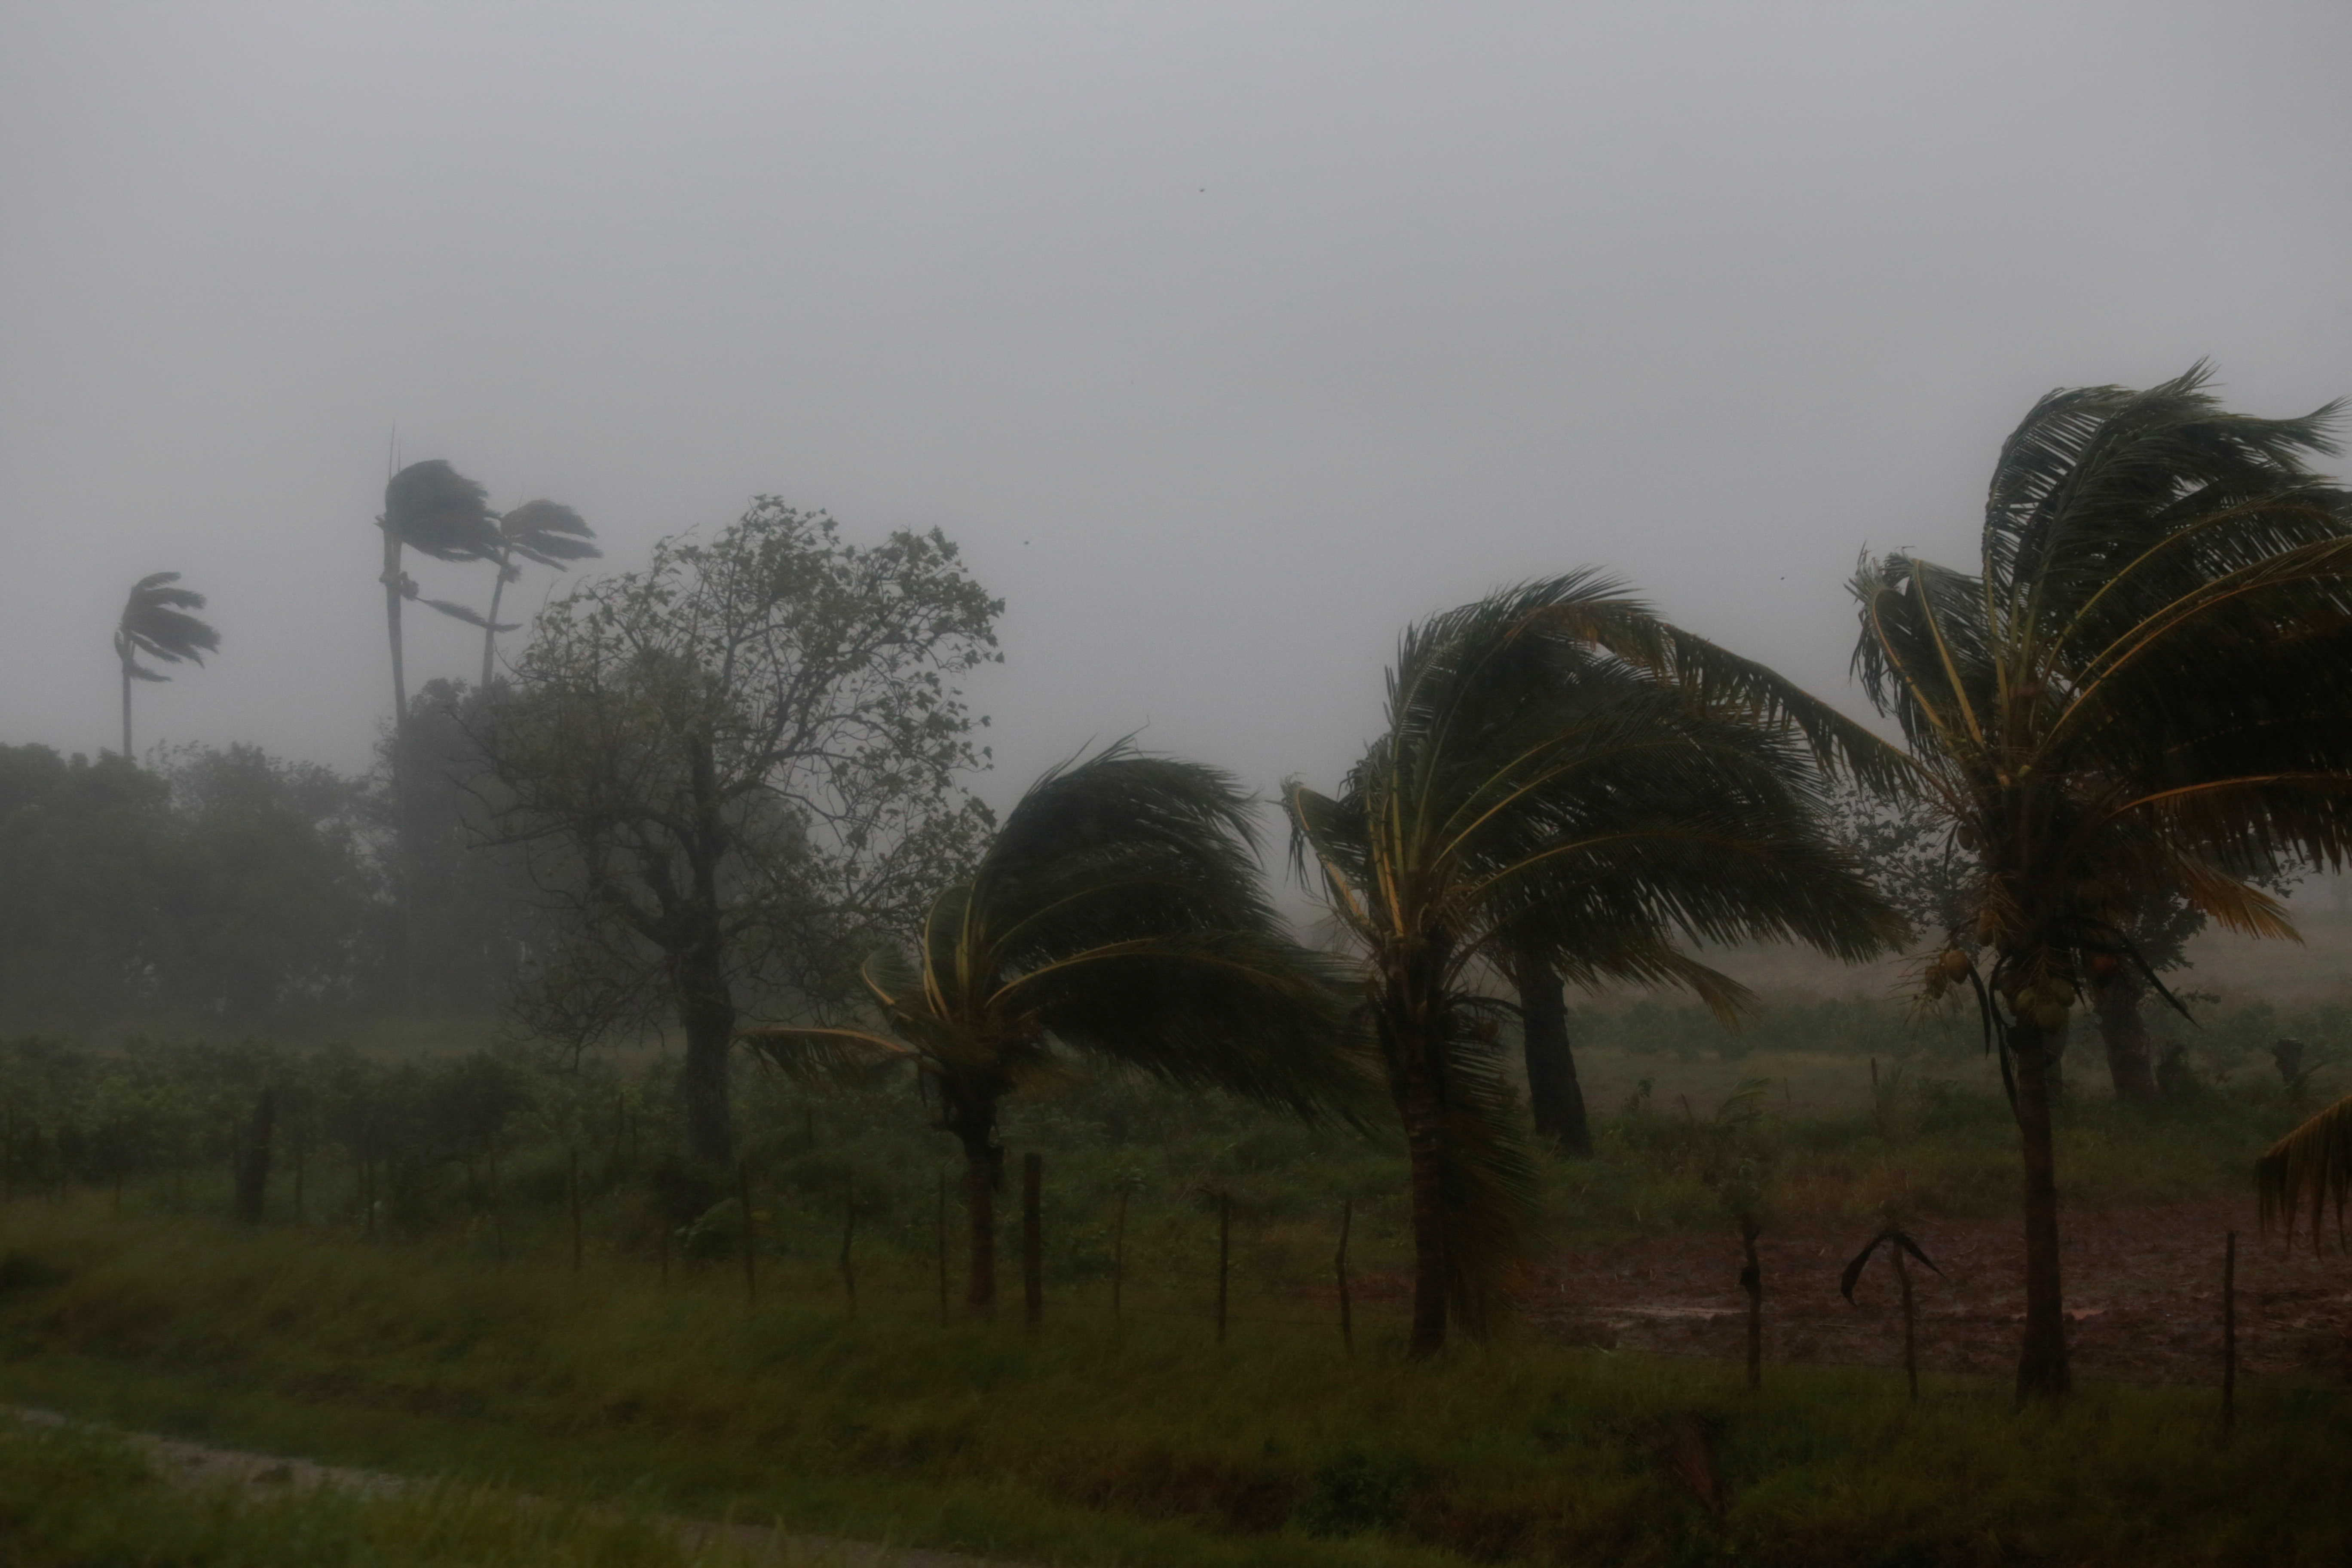 Strong winds and heavy rain pound the countryside after Hurricane Ian made landfall in Cuba's Pinar del Rio province earlier, in Consulacion del Sur, Cuba September 27, 2022. REUTERS/Stringer NO RESALES. NO ARCHIVES